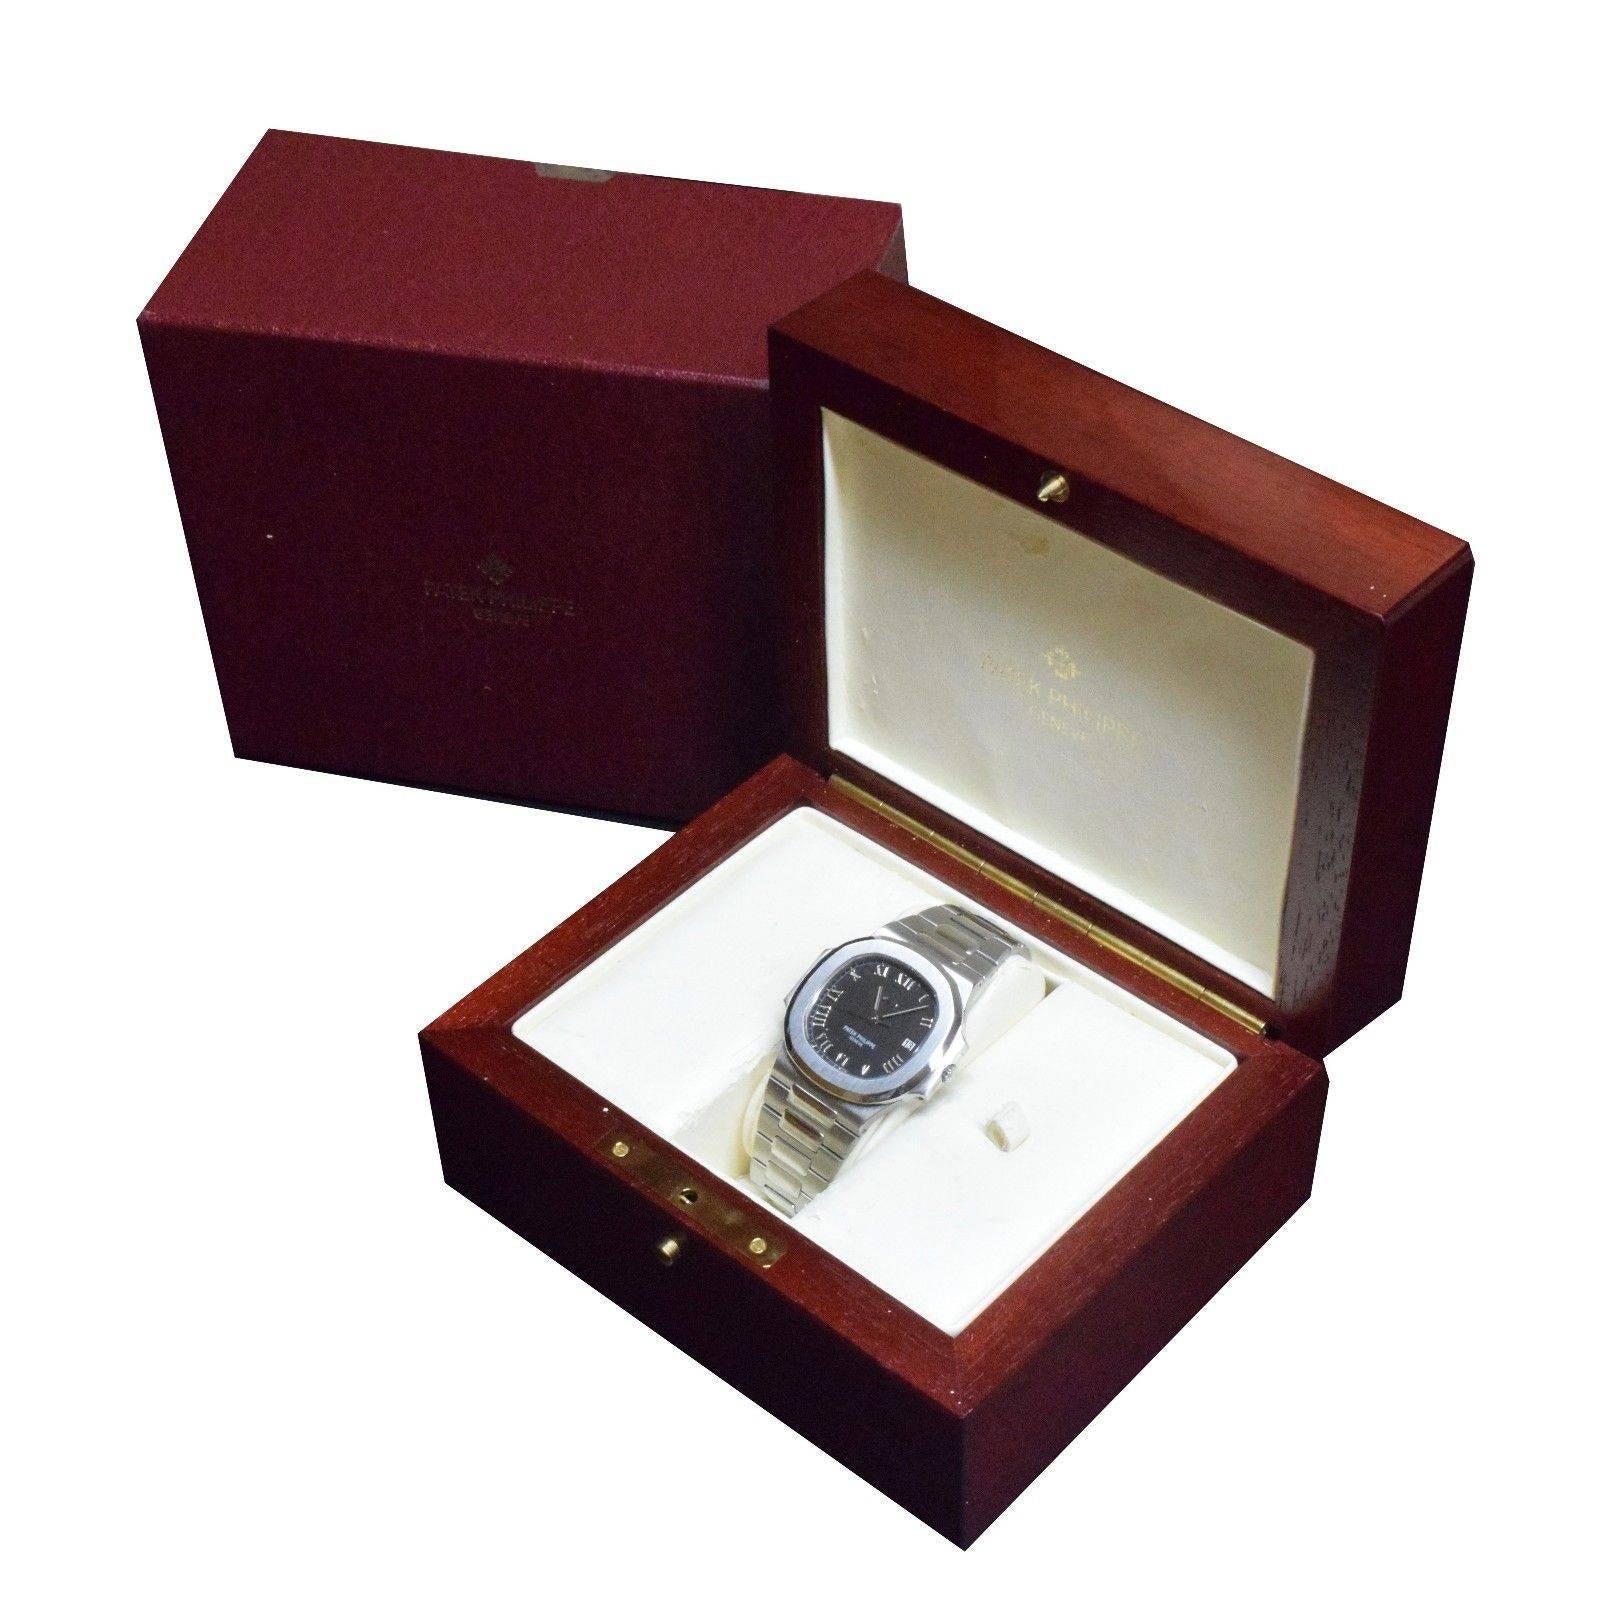 Patek Philippe Nautilus Jumbo 3710 Steel Power Reserve Watch, Papers and Box For Sale 1